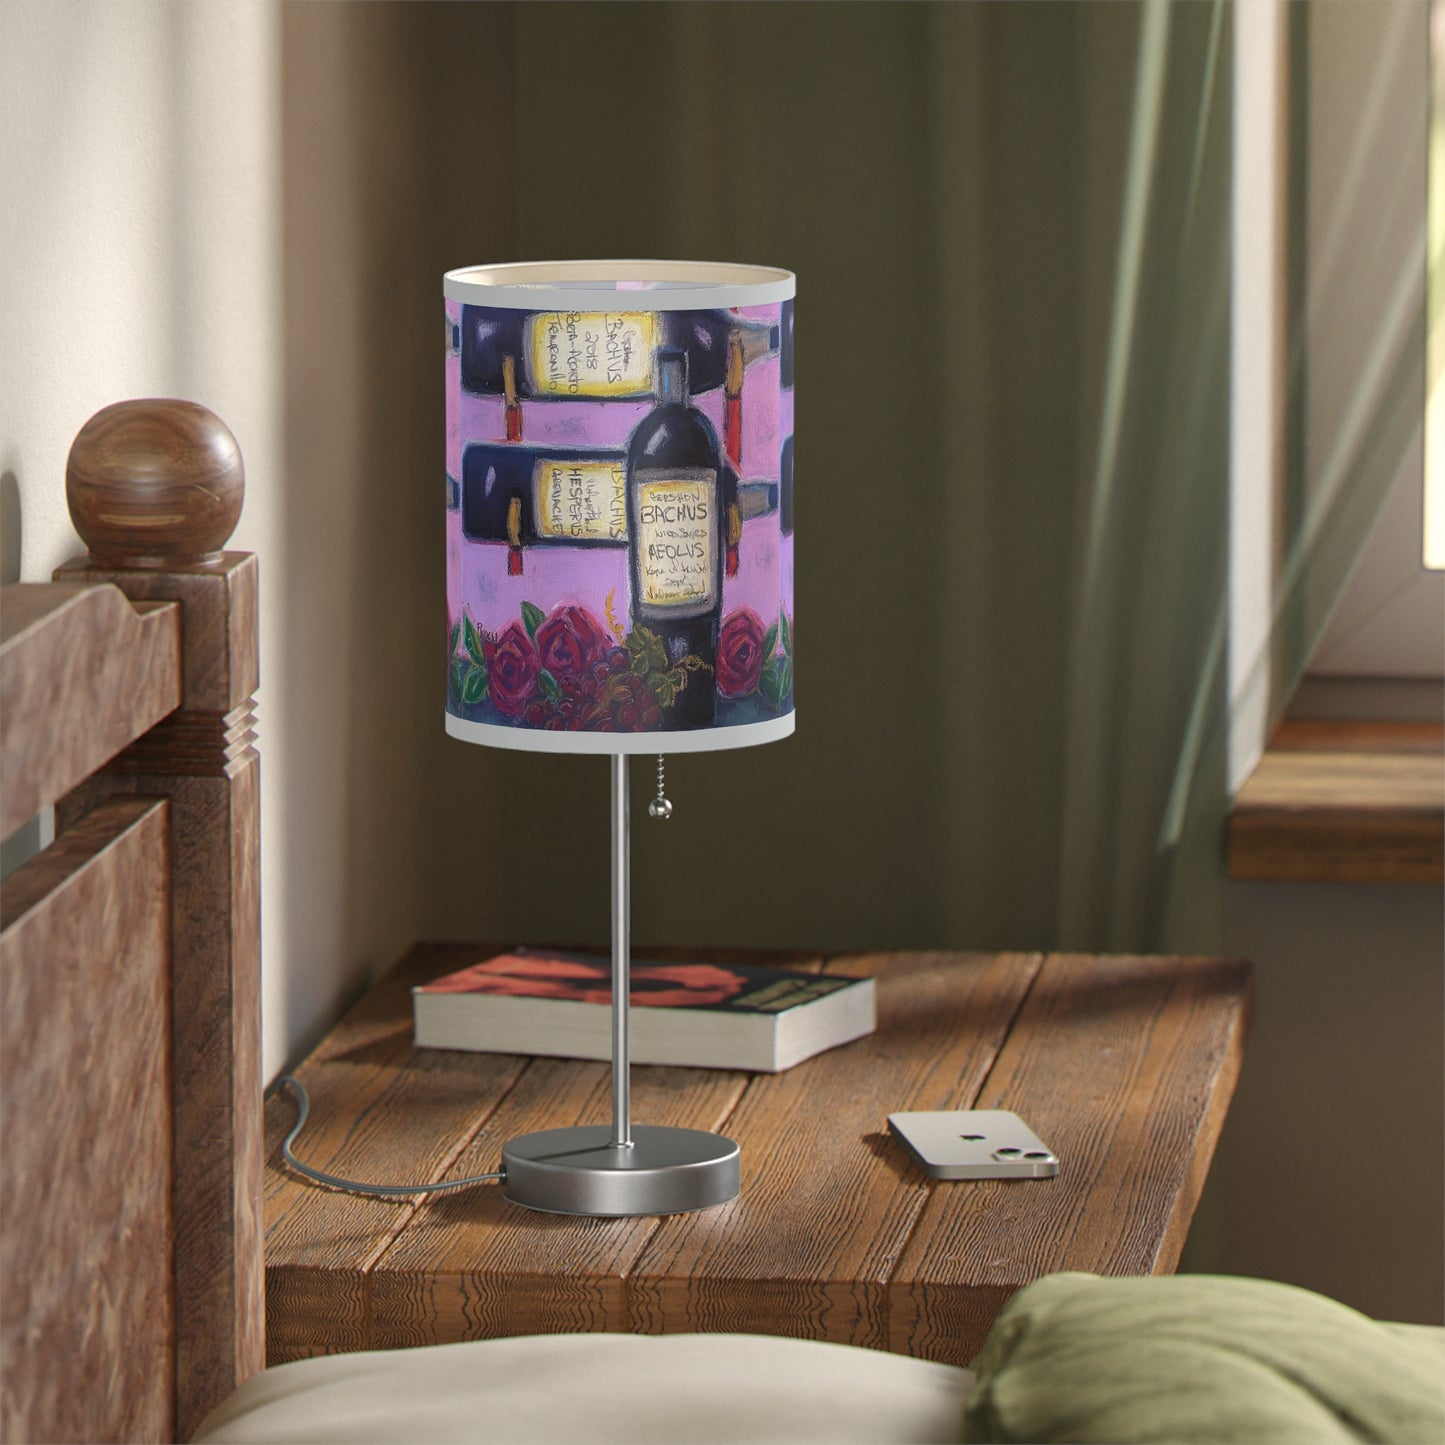 GBV Wine Rack and Roses #2 (expanded to show more roses) Lamp on a Stand, US|CA plug